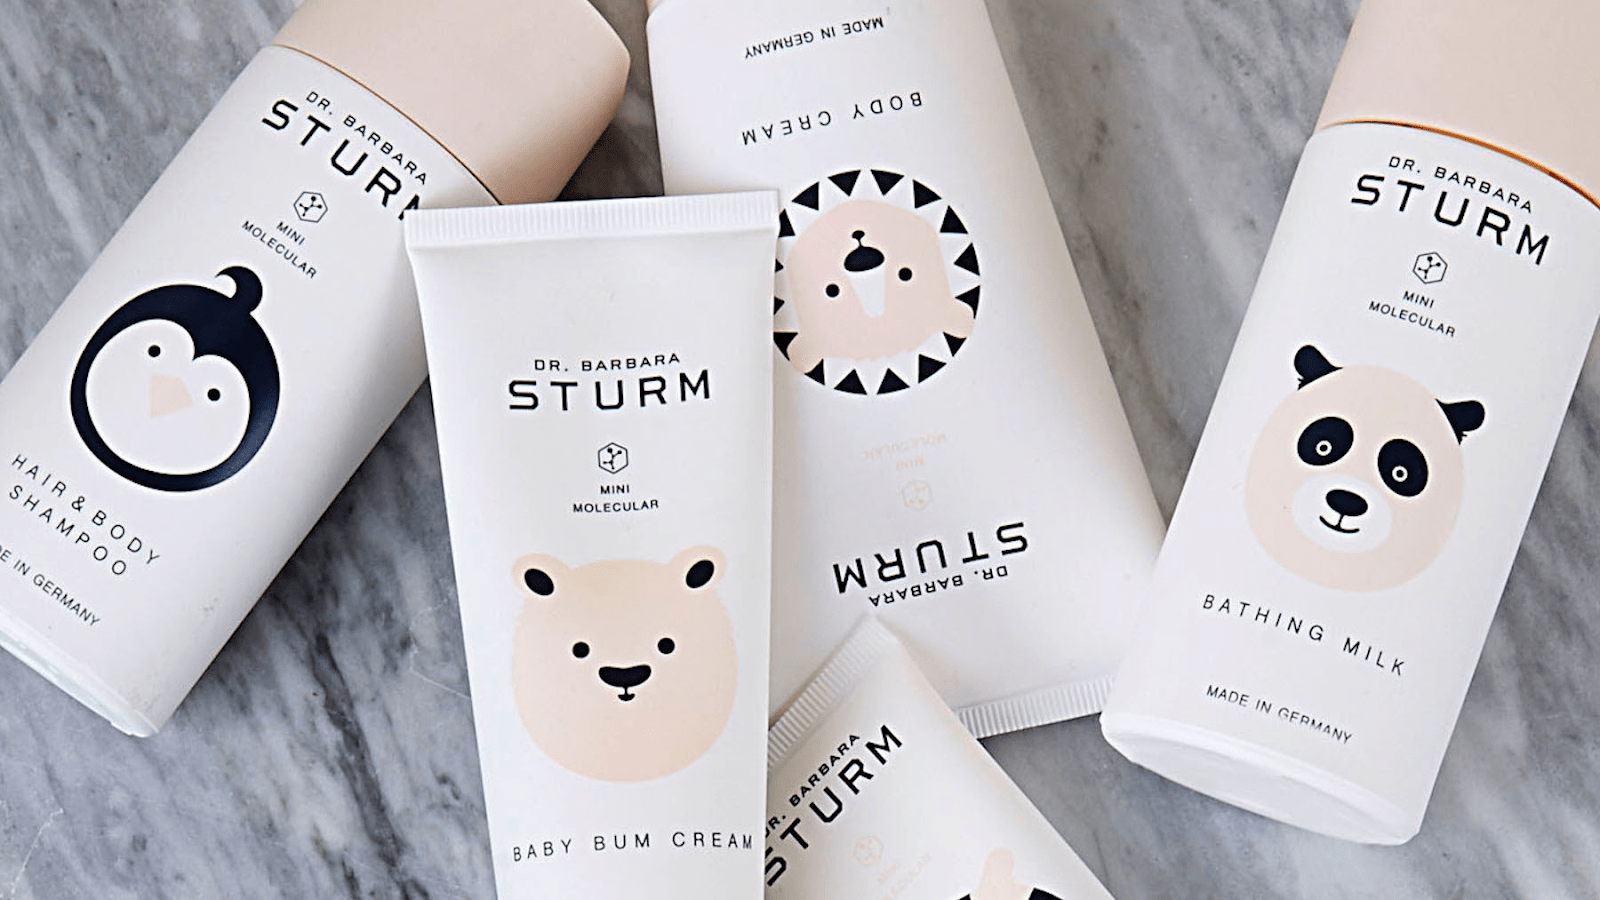 Bubble Skincare expands distribution into specialty retail; launches into  Ulta Beauty - Global Cosmetics News